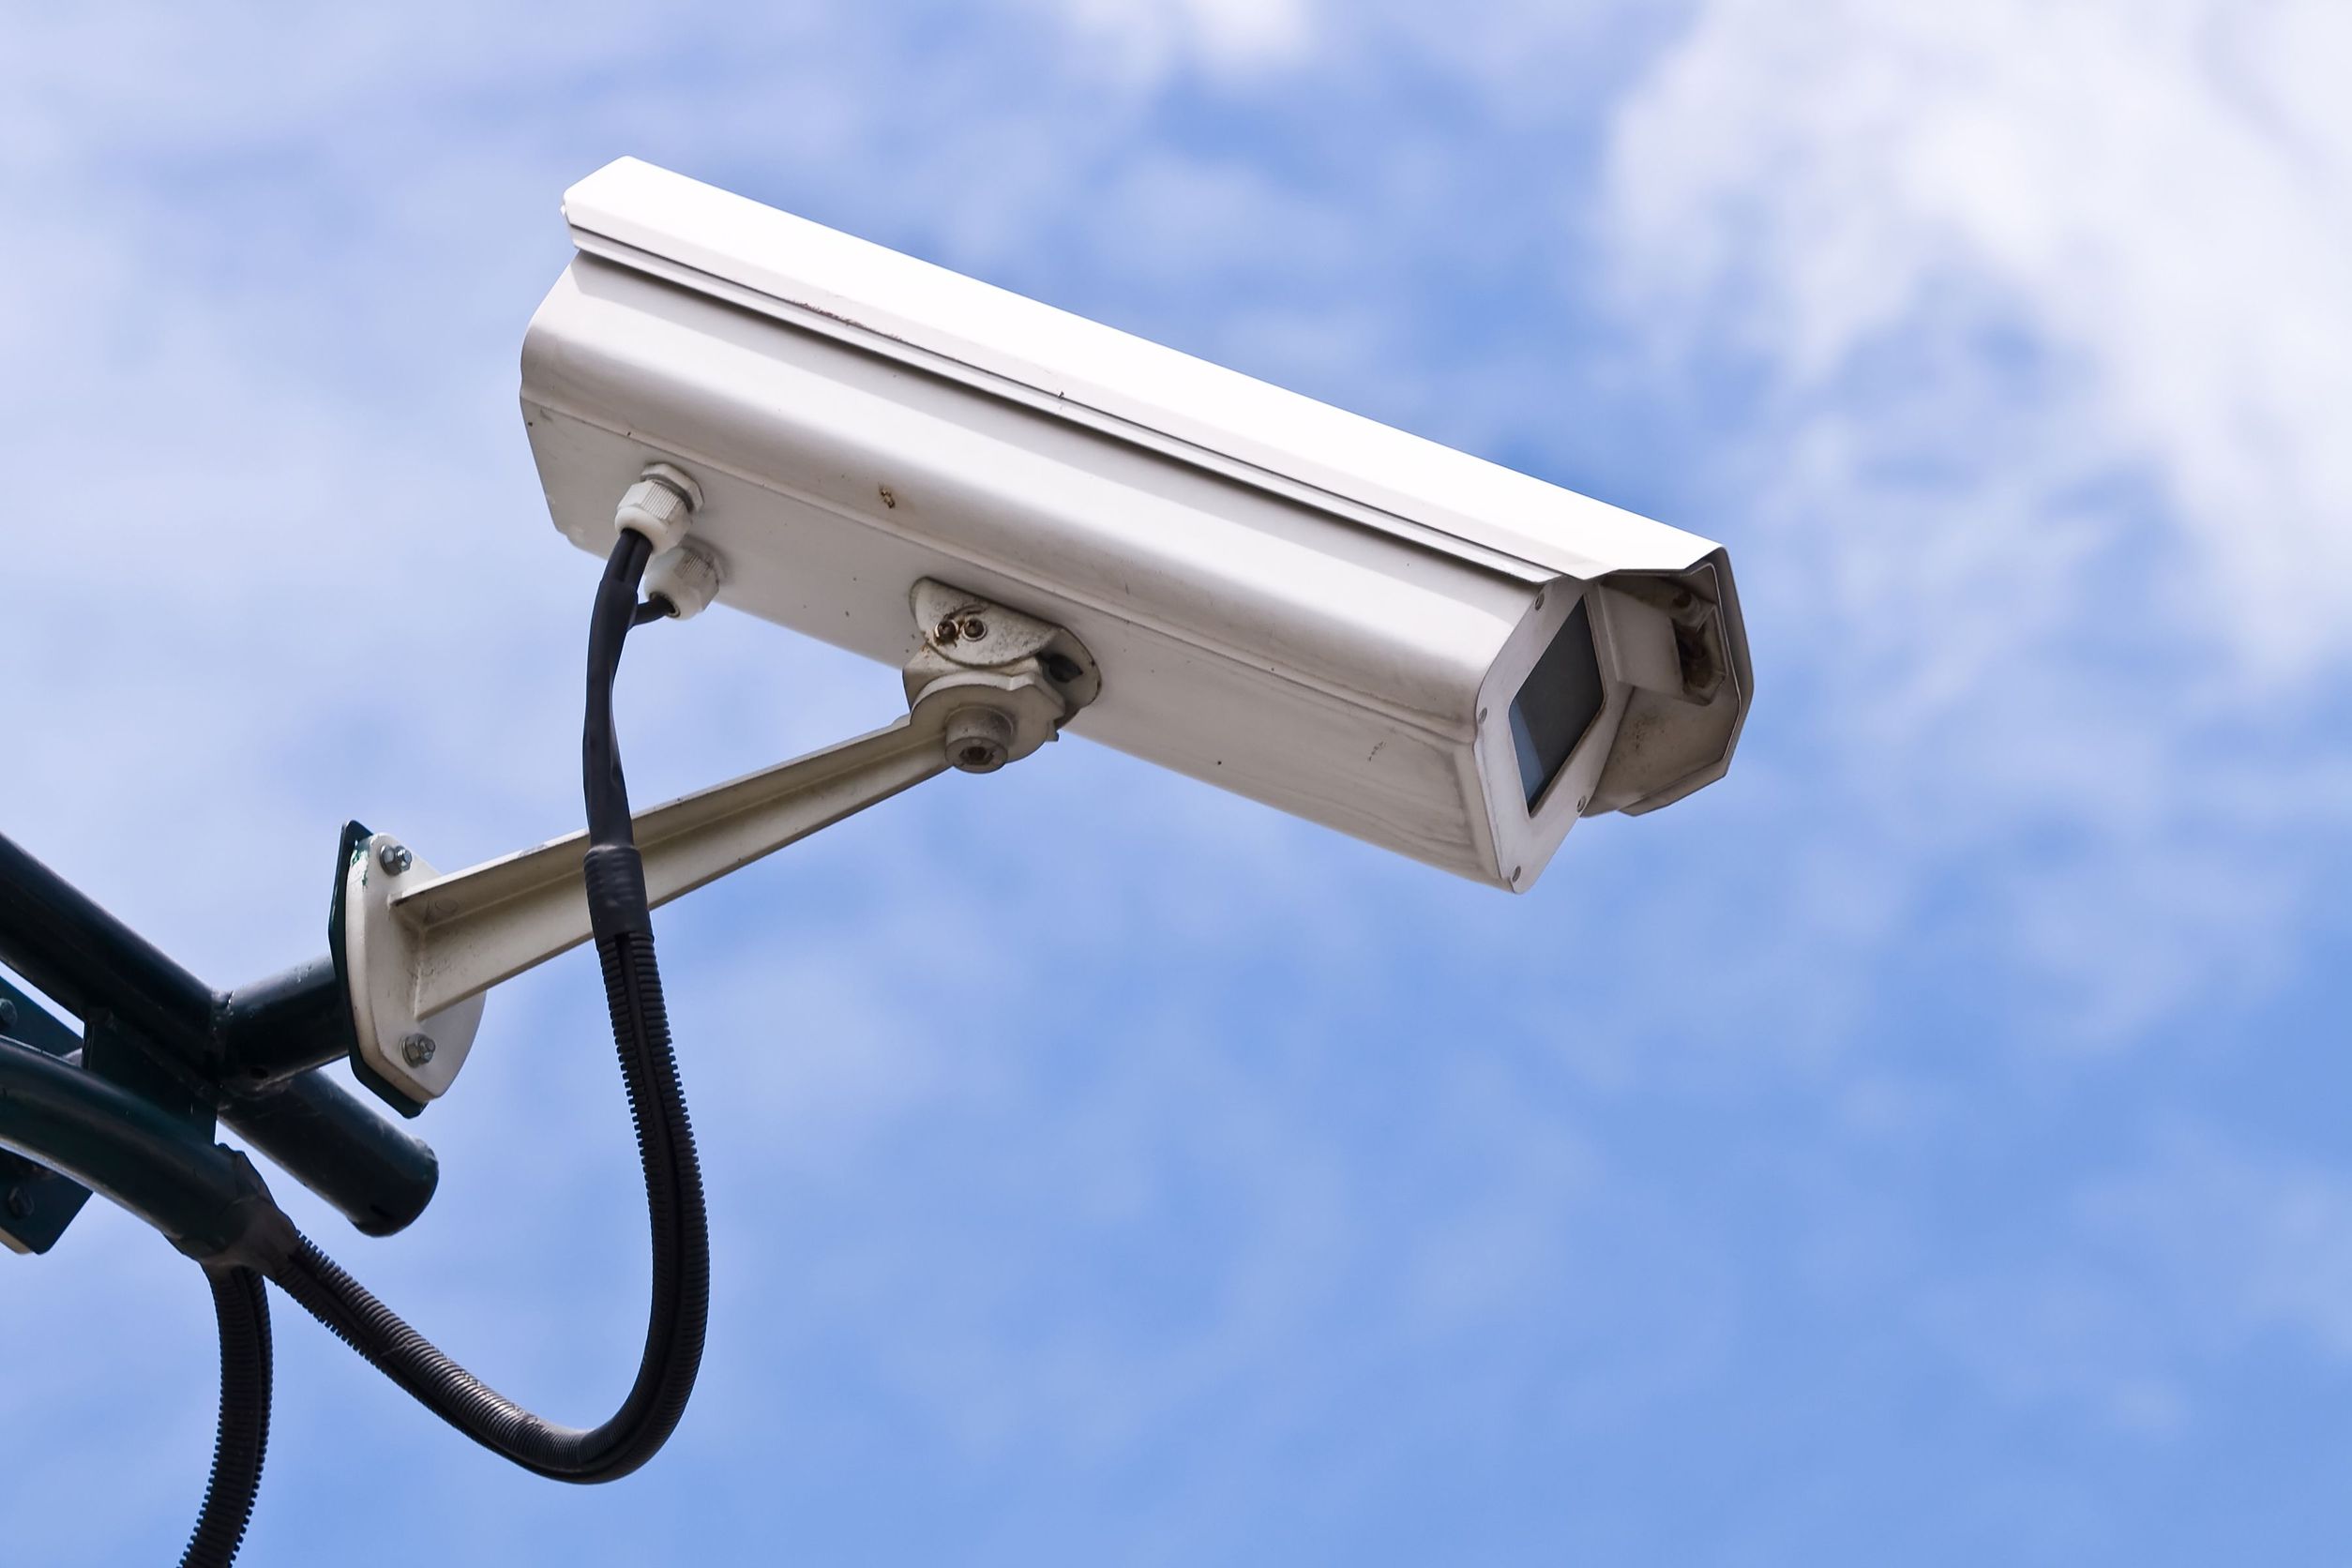 Guidelines to Follow When Trying to Protect Outdoor Security Cameras